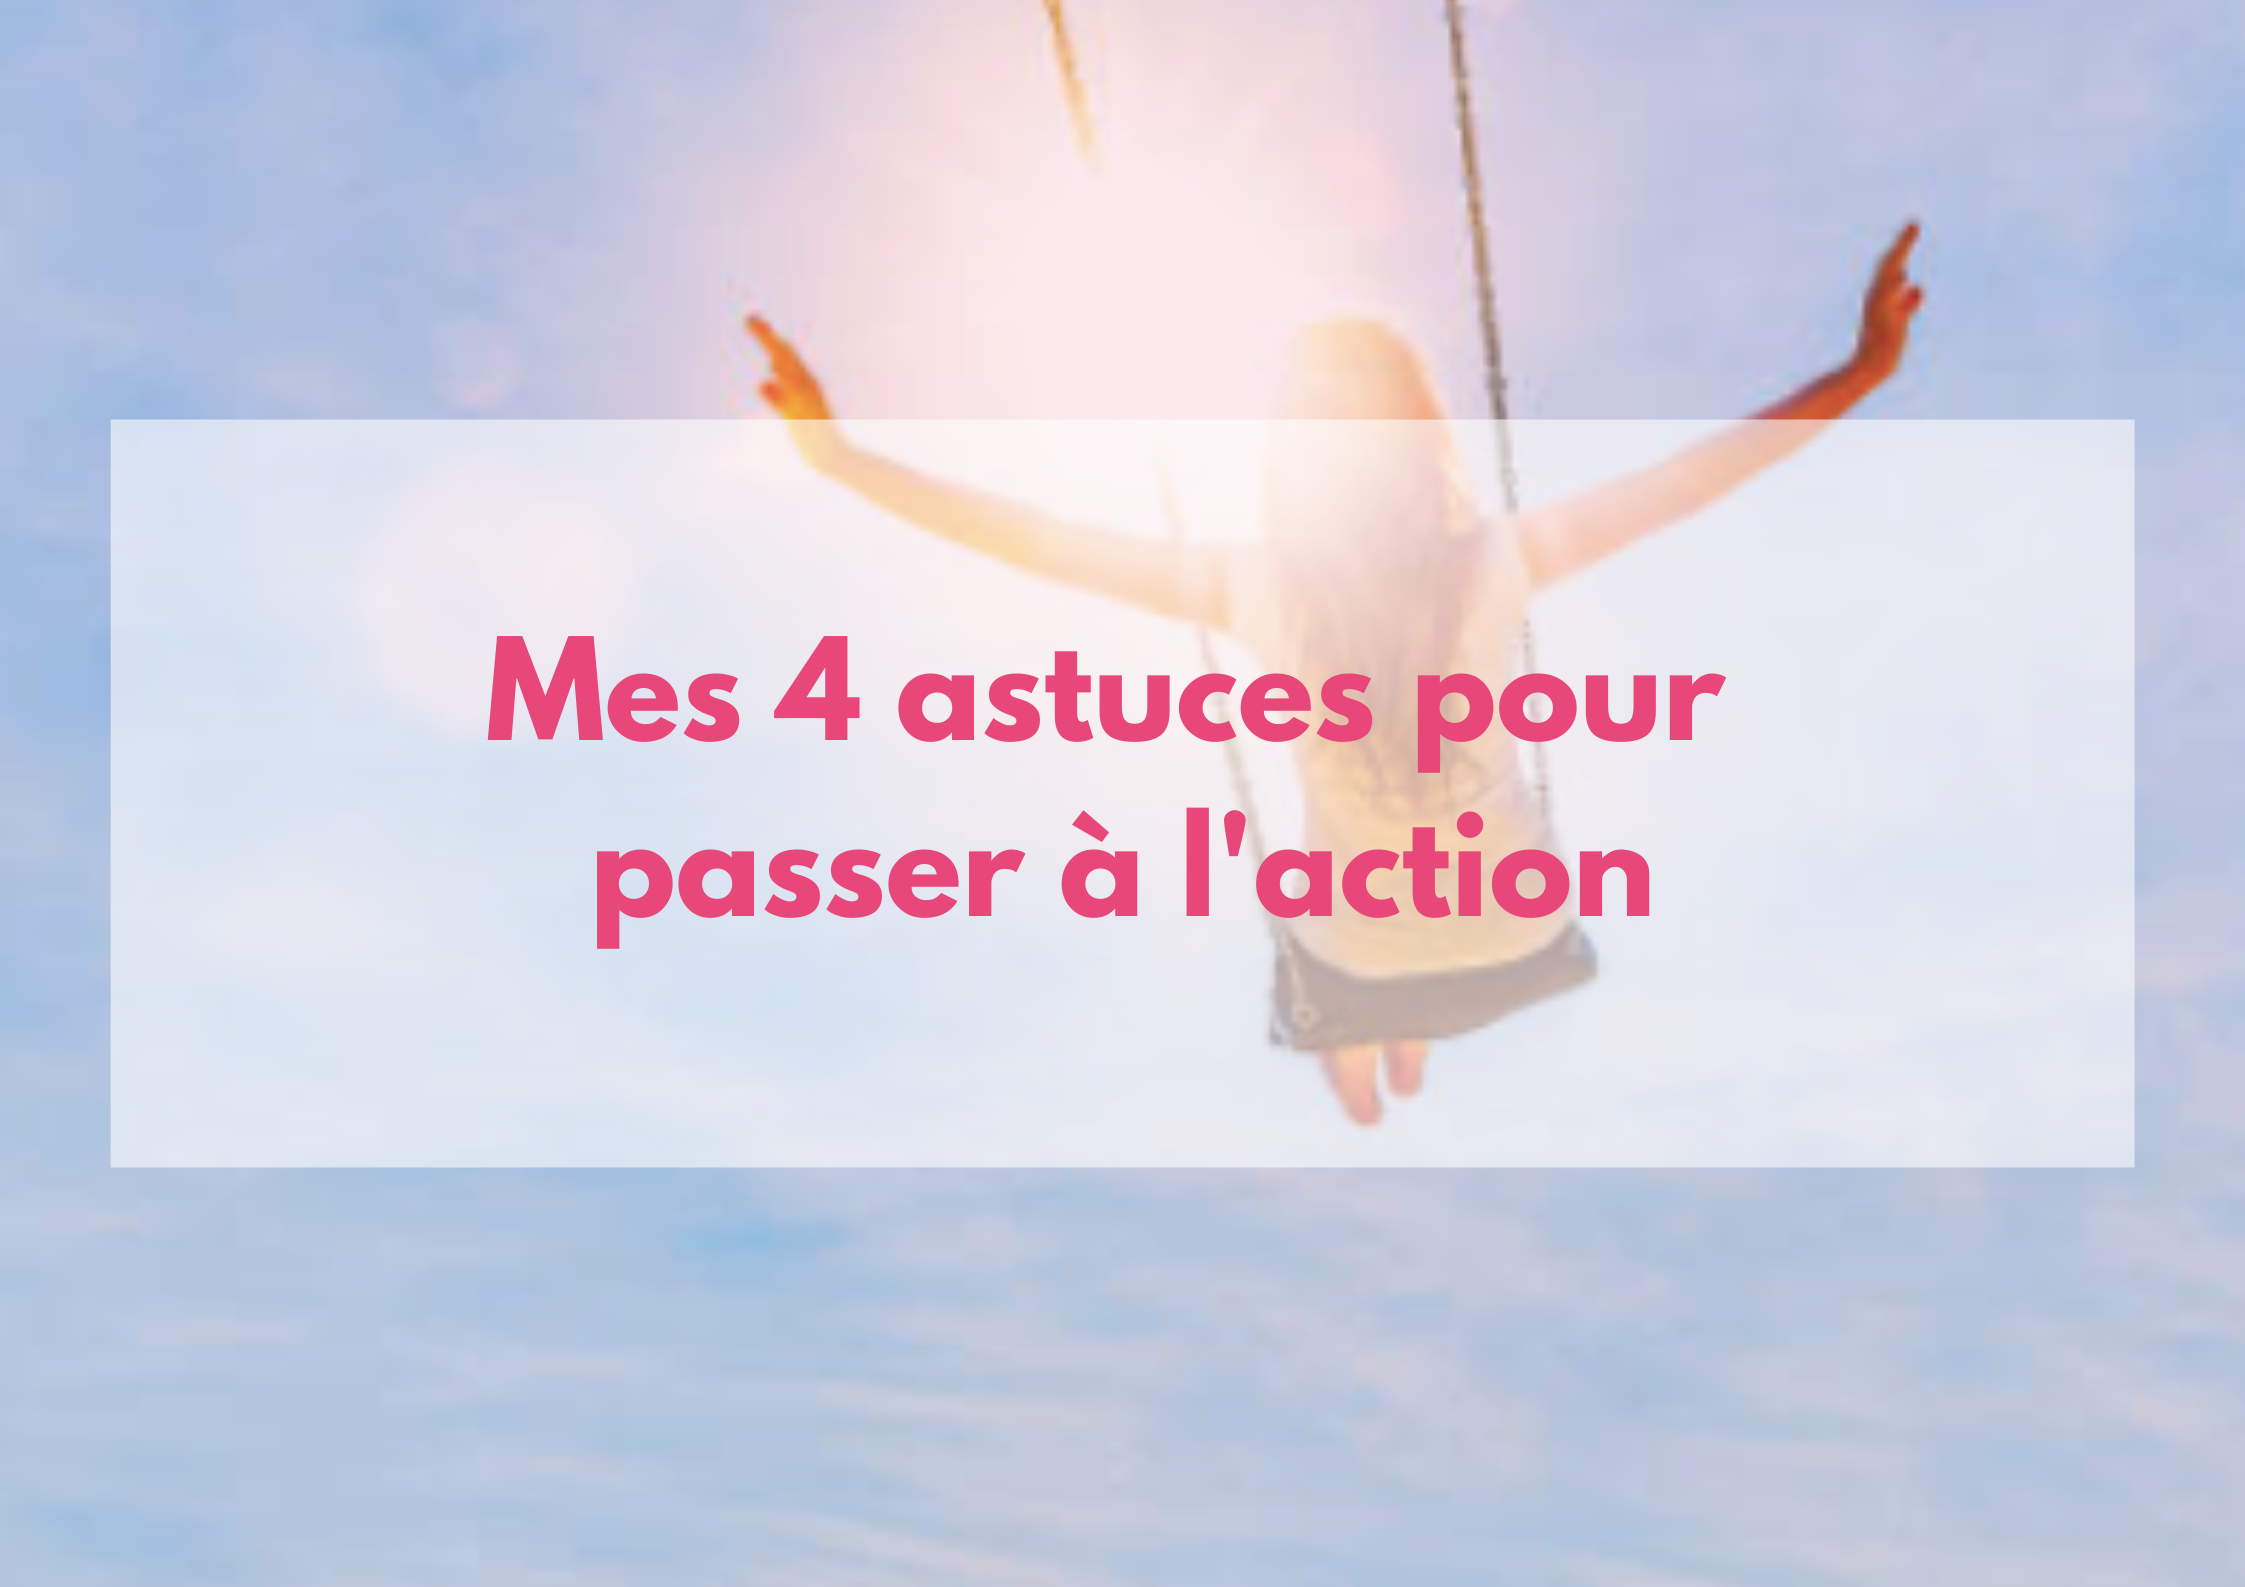 You are currently viewing Mes 4 astuces pour passer à l’action